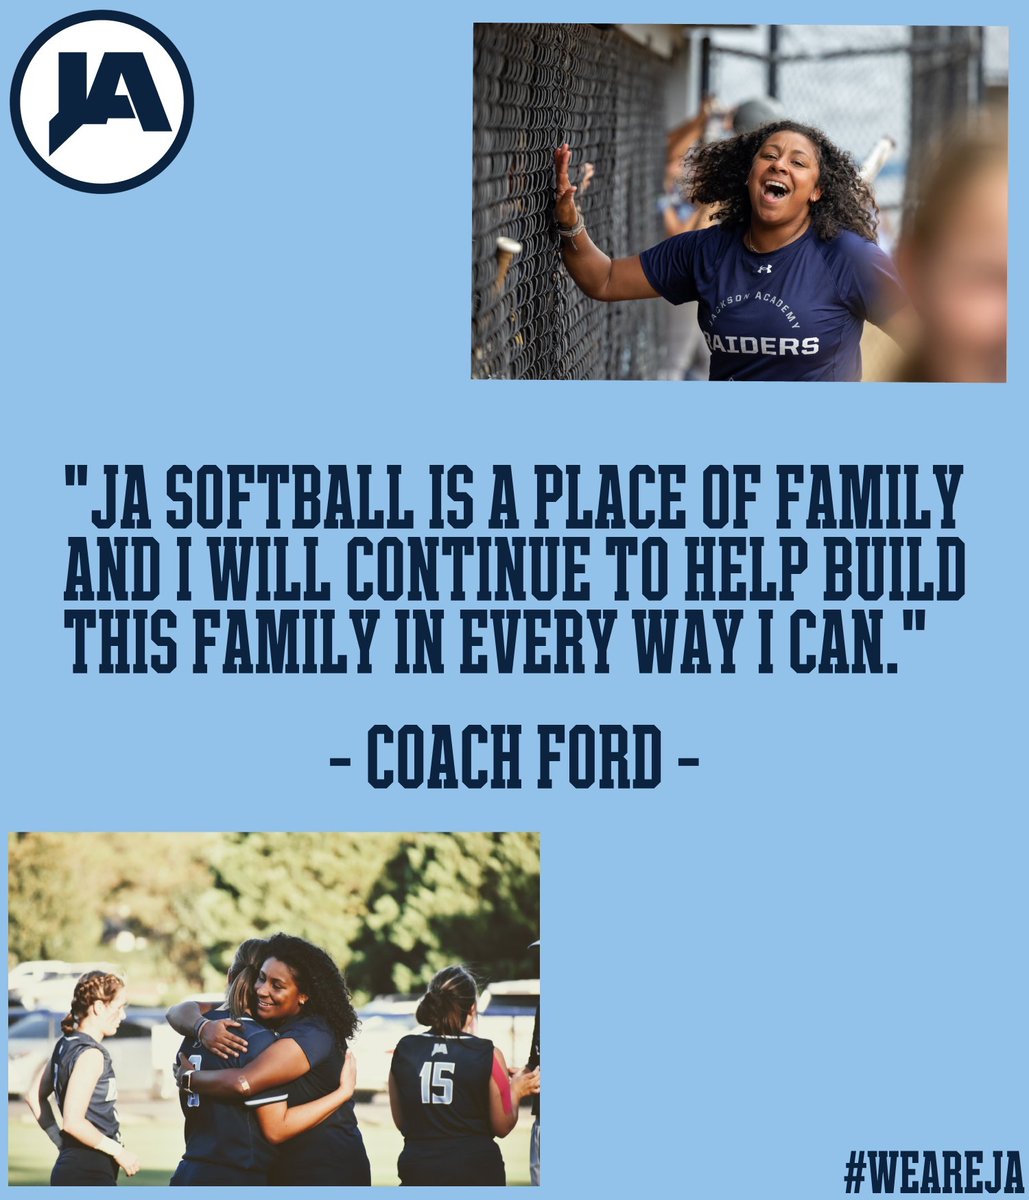 Jackson Academy is proud to announce Brittany Ford as the new Head Softball Coach. She will continue her roles as Assistant Girls Basketball Coach. We are excited to see her expanding her roles as a leader in the JA Athletic Department. #WeAreJA